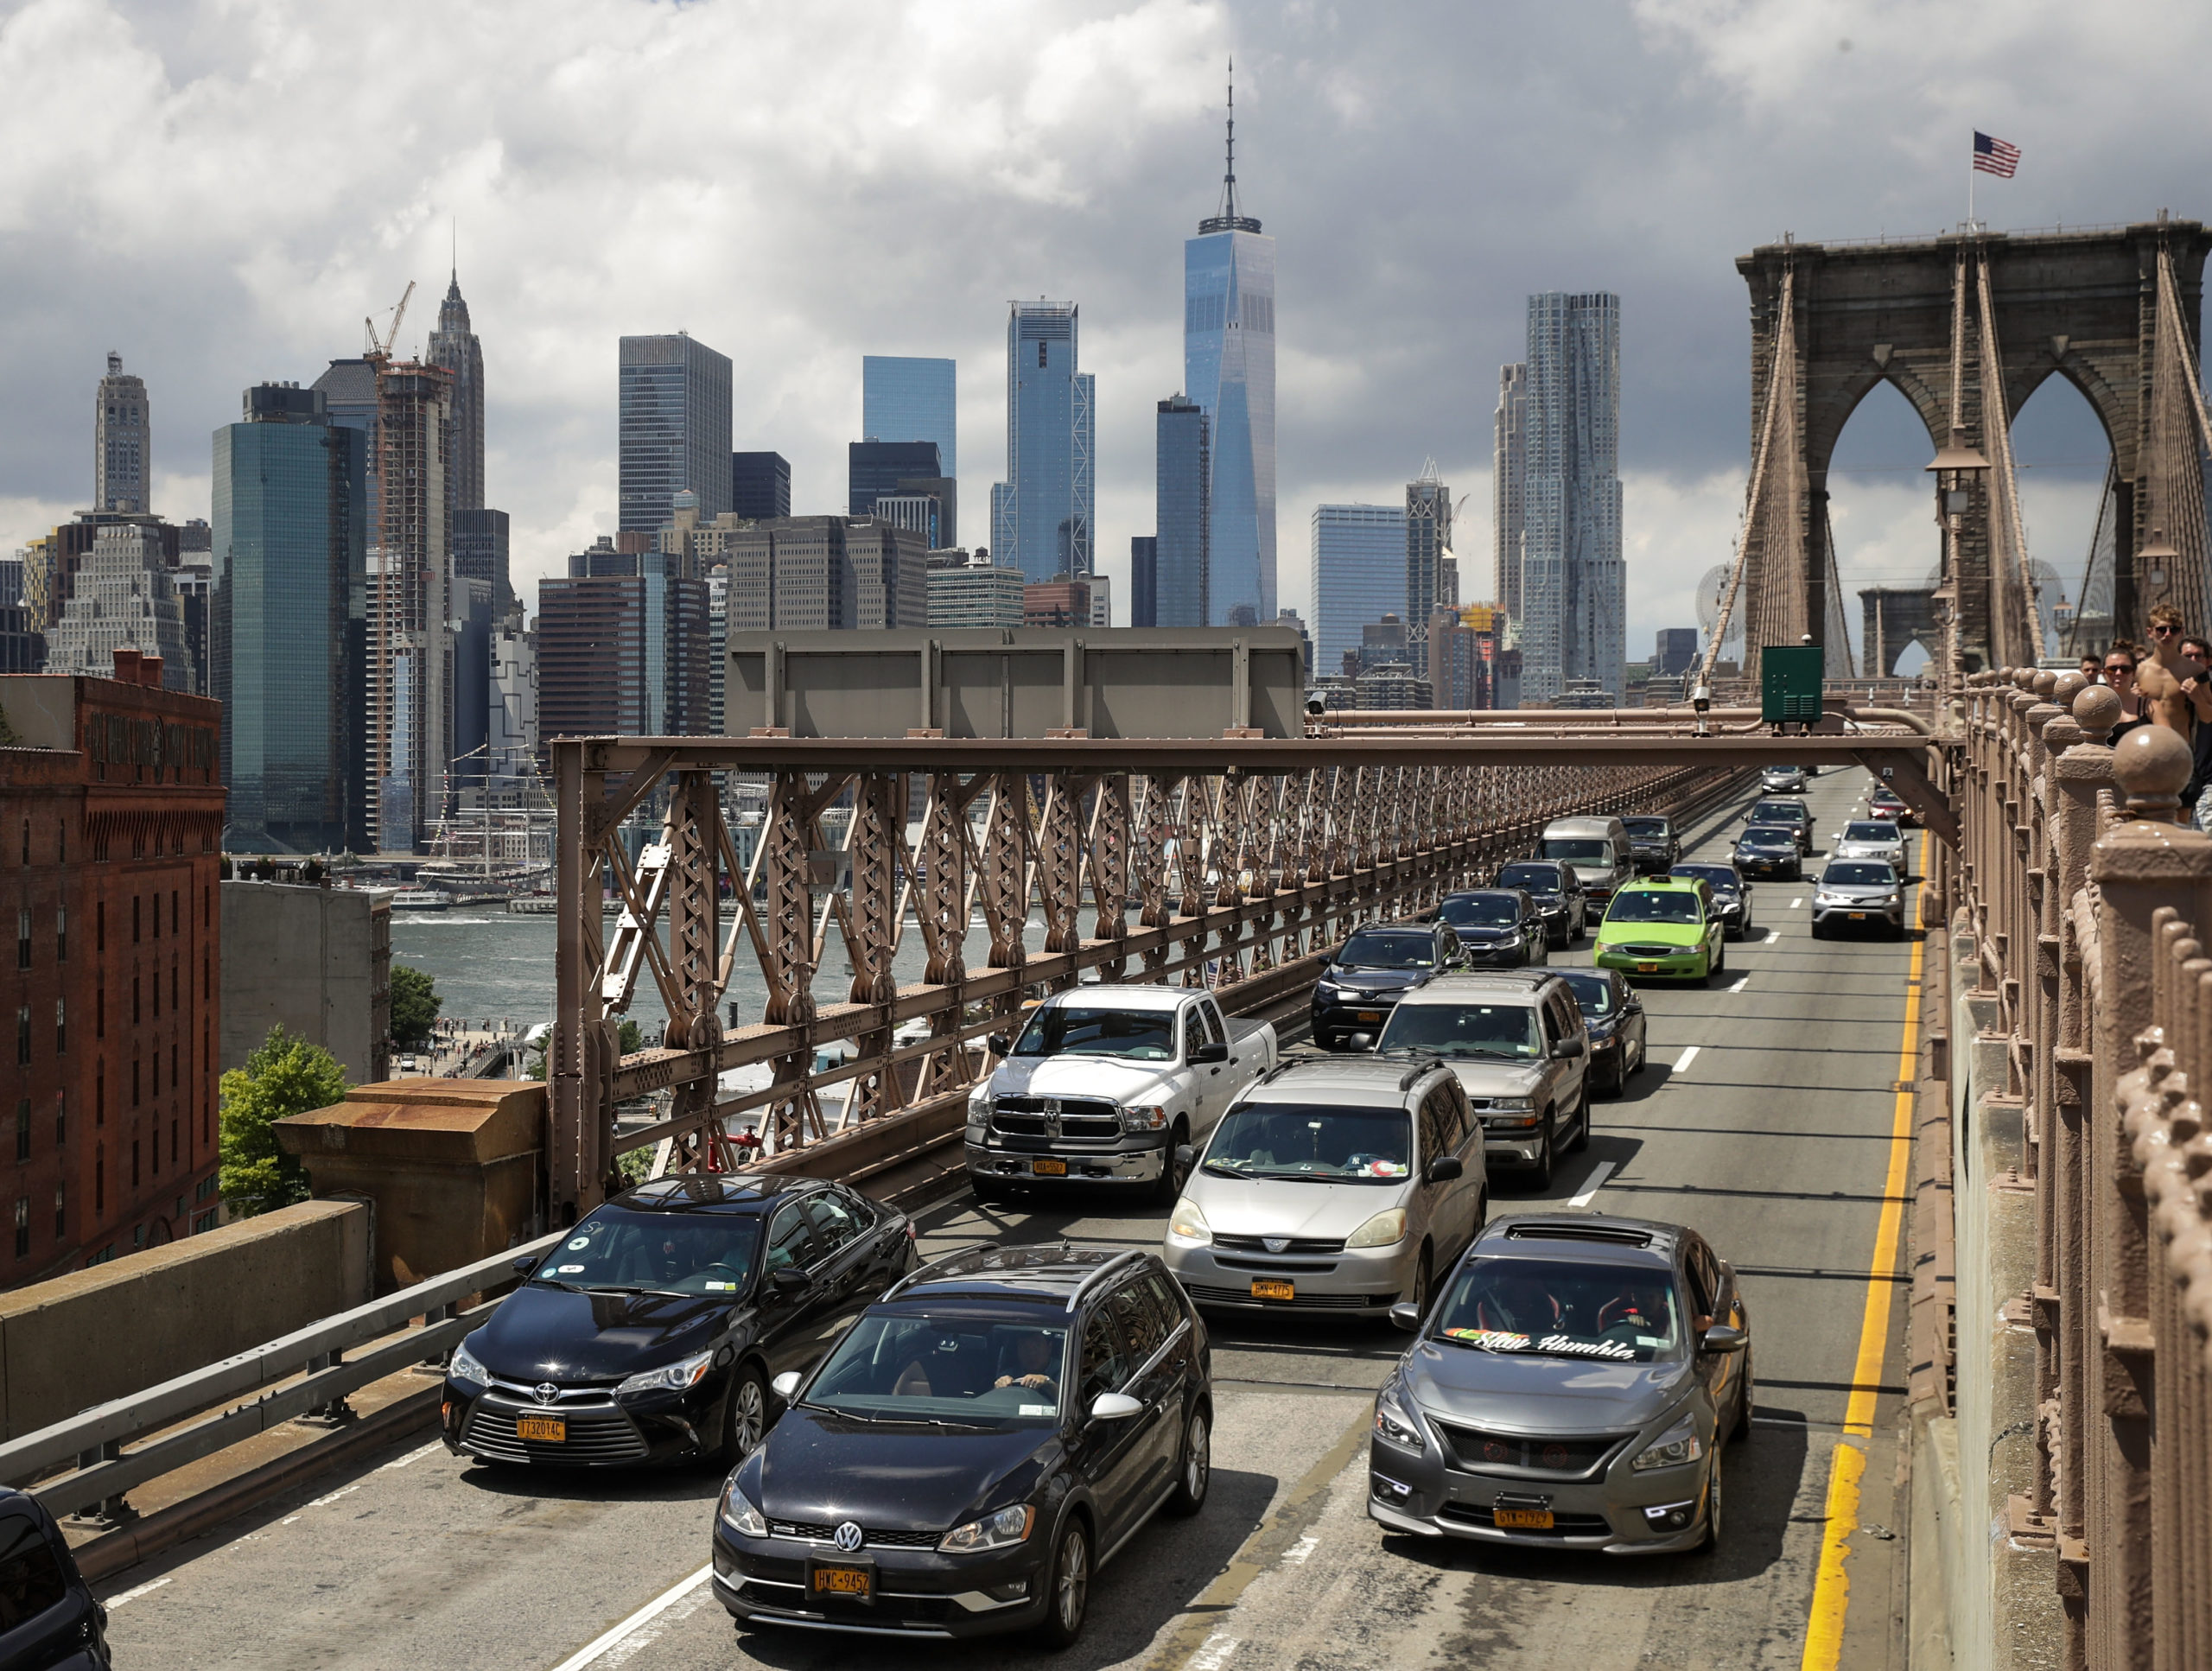 NEW YORK, NY - AUGUST 2: Traffic moves across the Brooklyn Bridge, August 2, 2018 in New York City. On Thursday, the Trump administration announced a proposal to weaken fuel-efficiency requirements for the nation's cars and trucks. The rollback is likely to spark legal challenges from California and other states. (Photo by Drew Angerer/Getty Images)